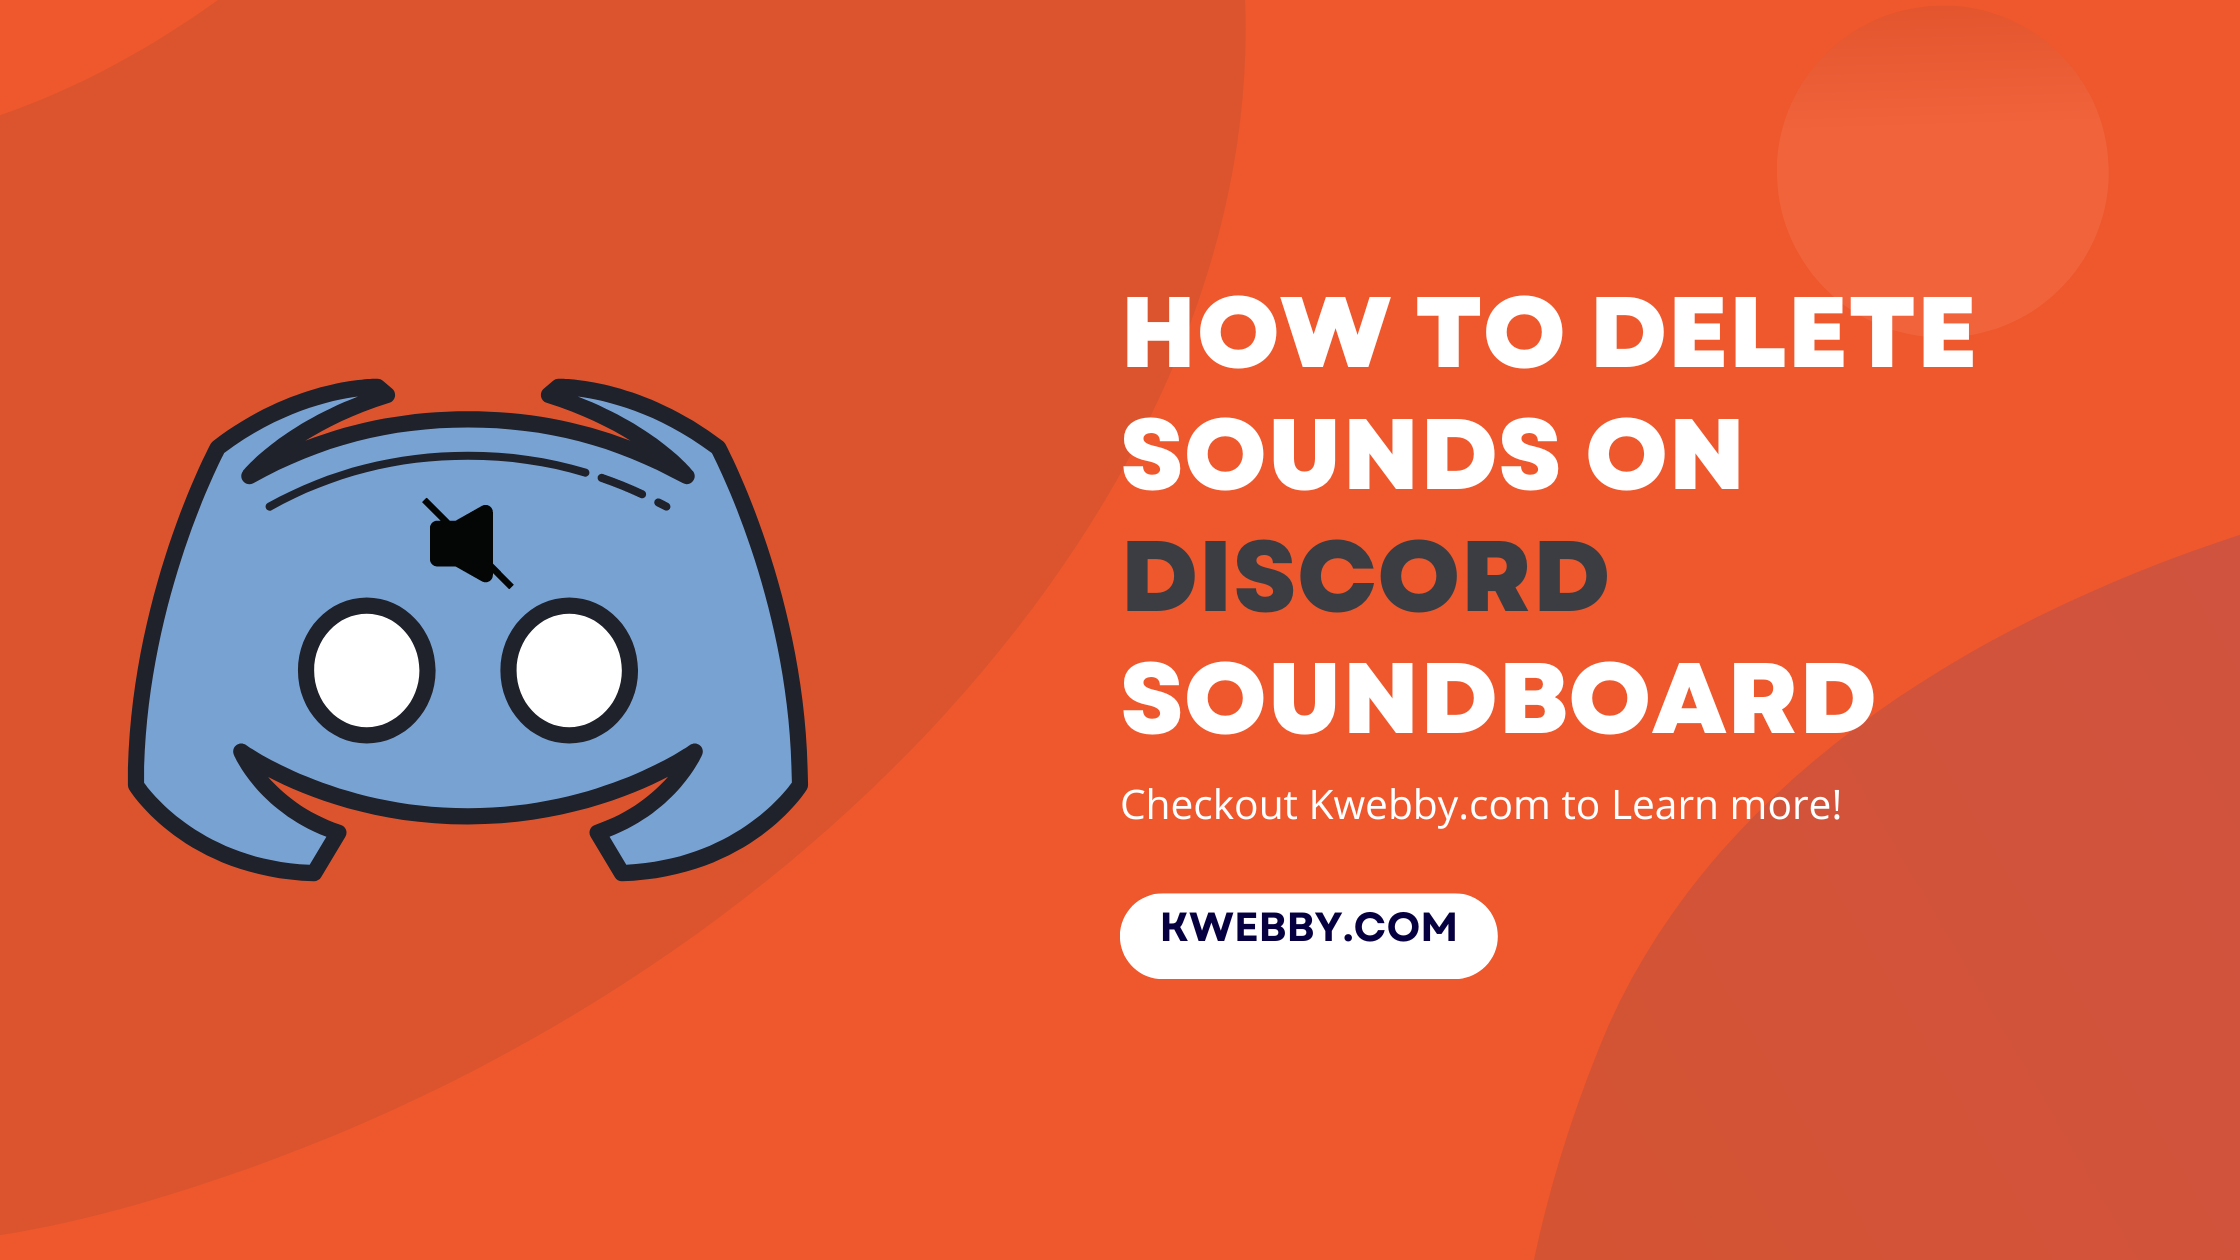 How to delete sounds on Discord soundboard